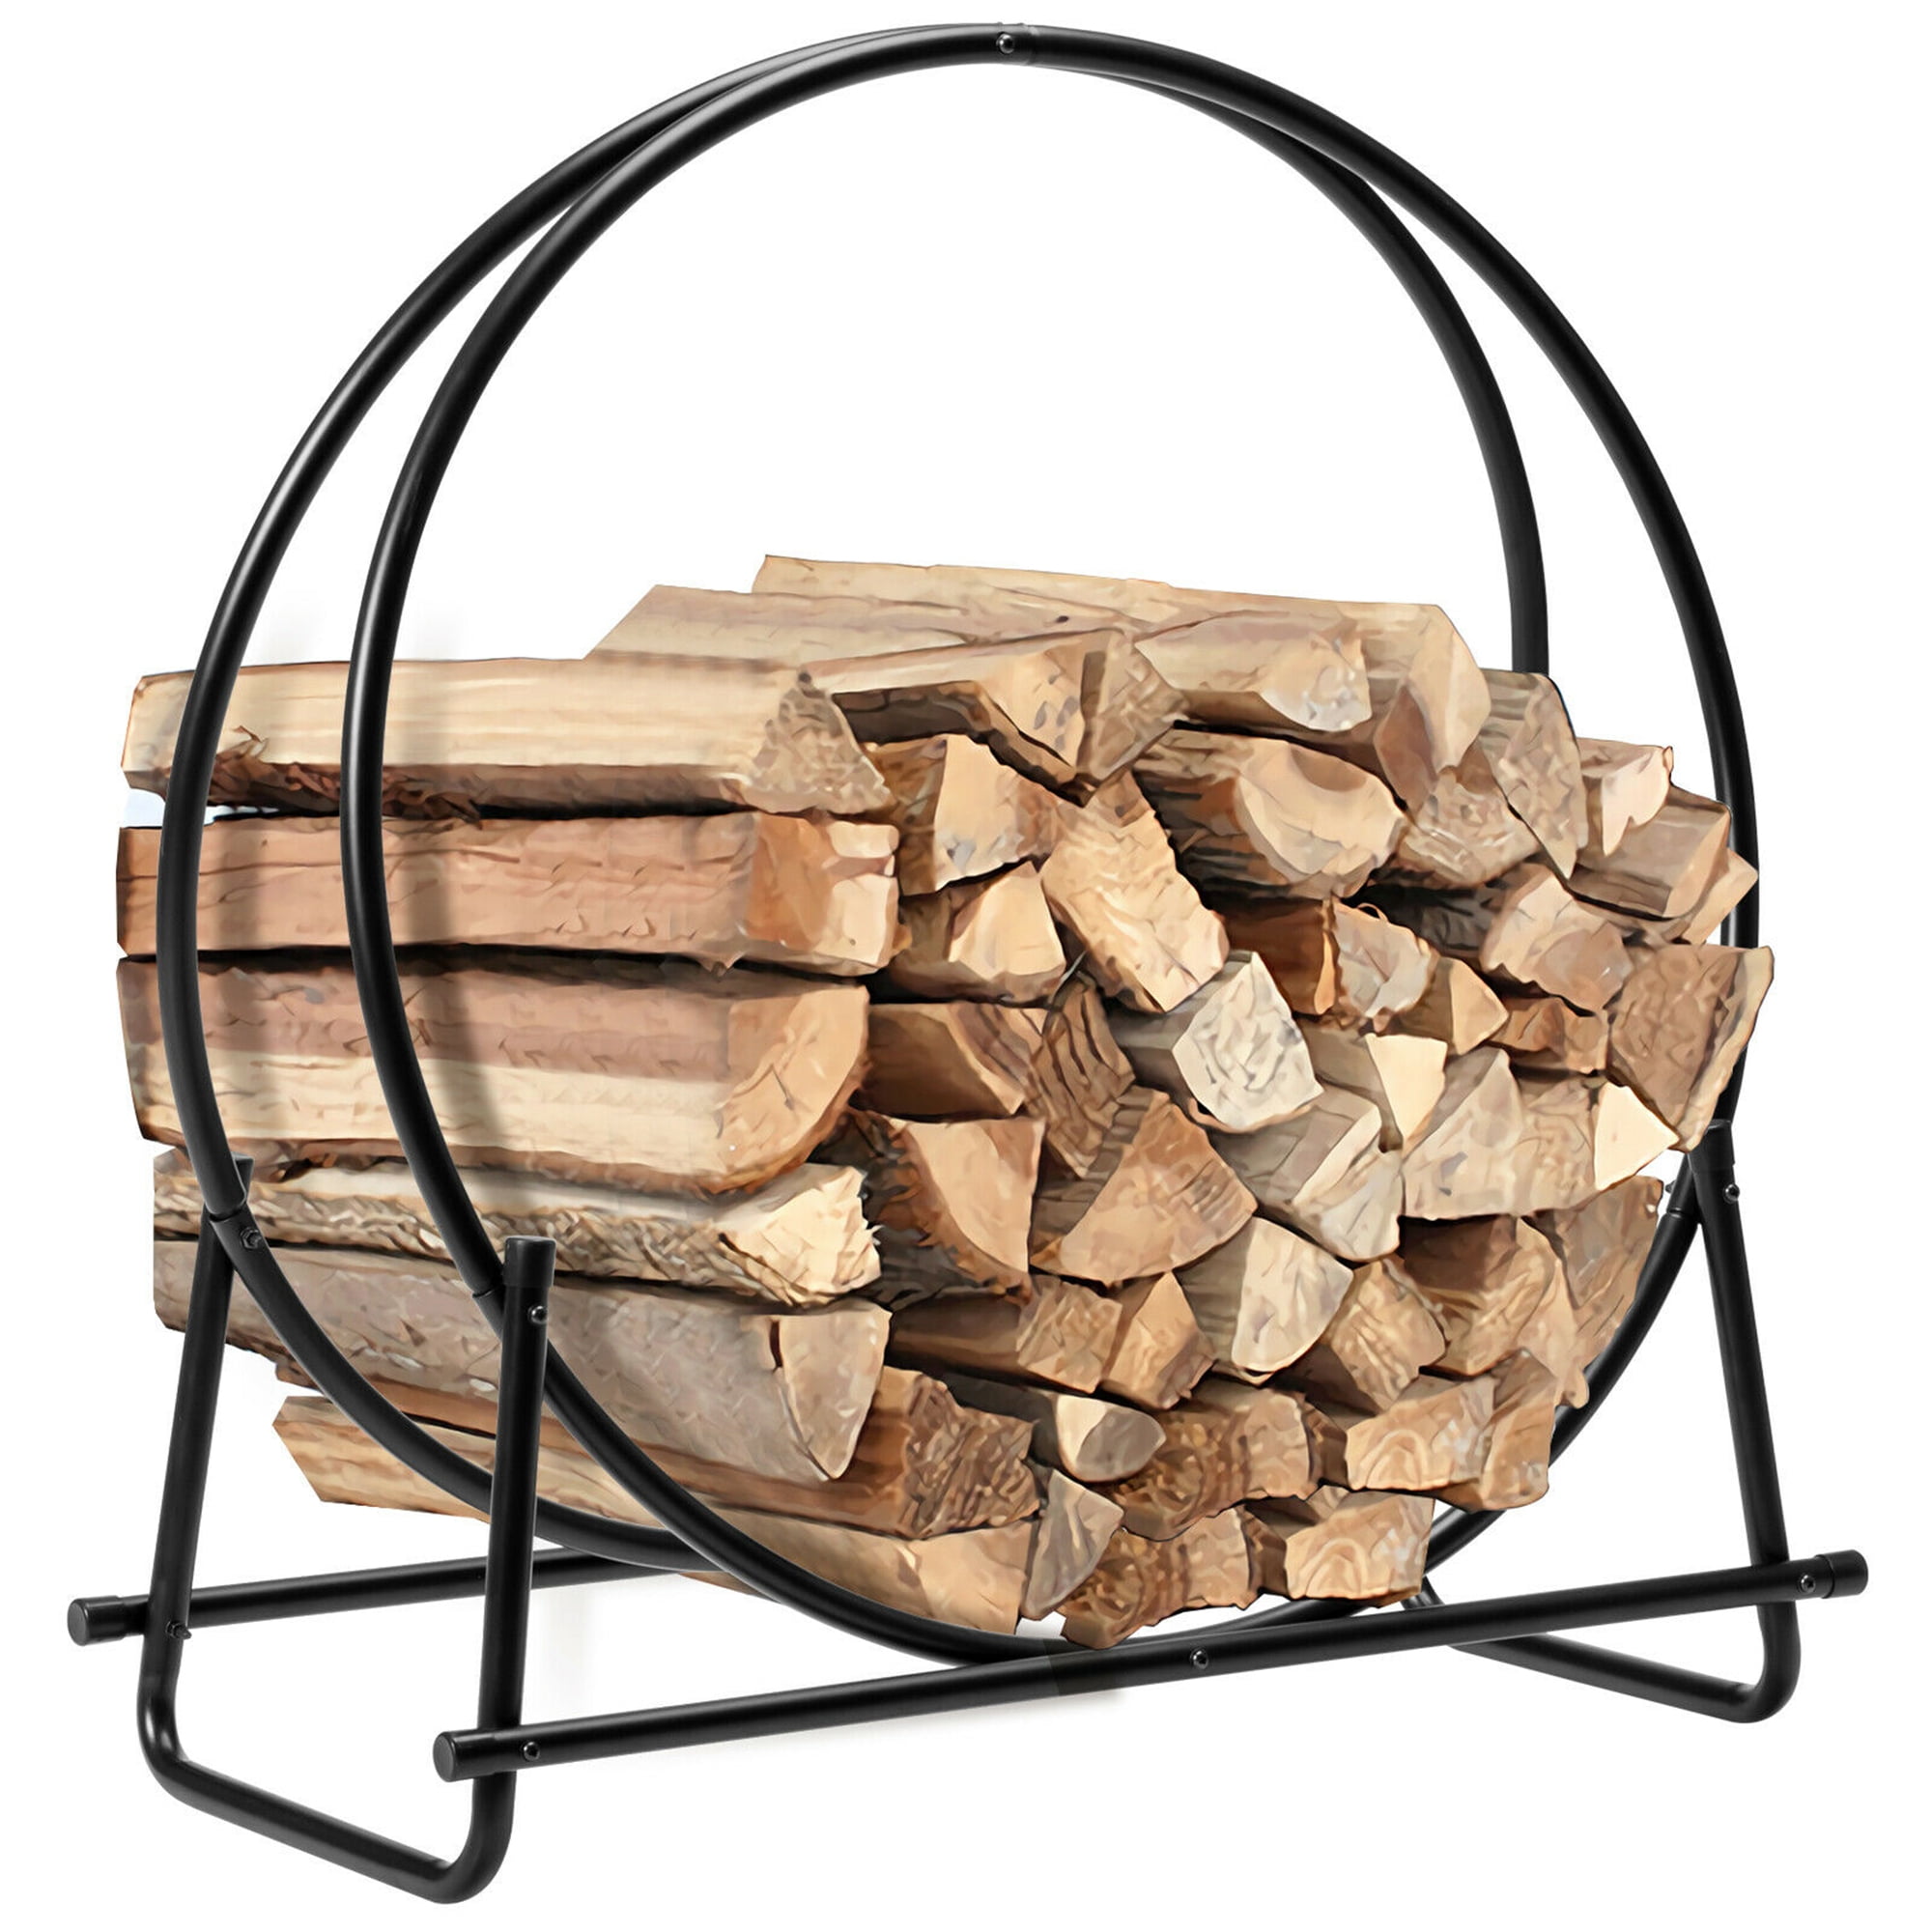 North East Harbor Outdoor Firewood Log Rack Cover - 97